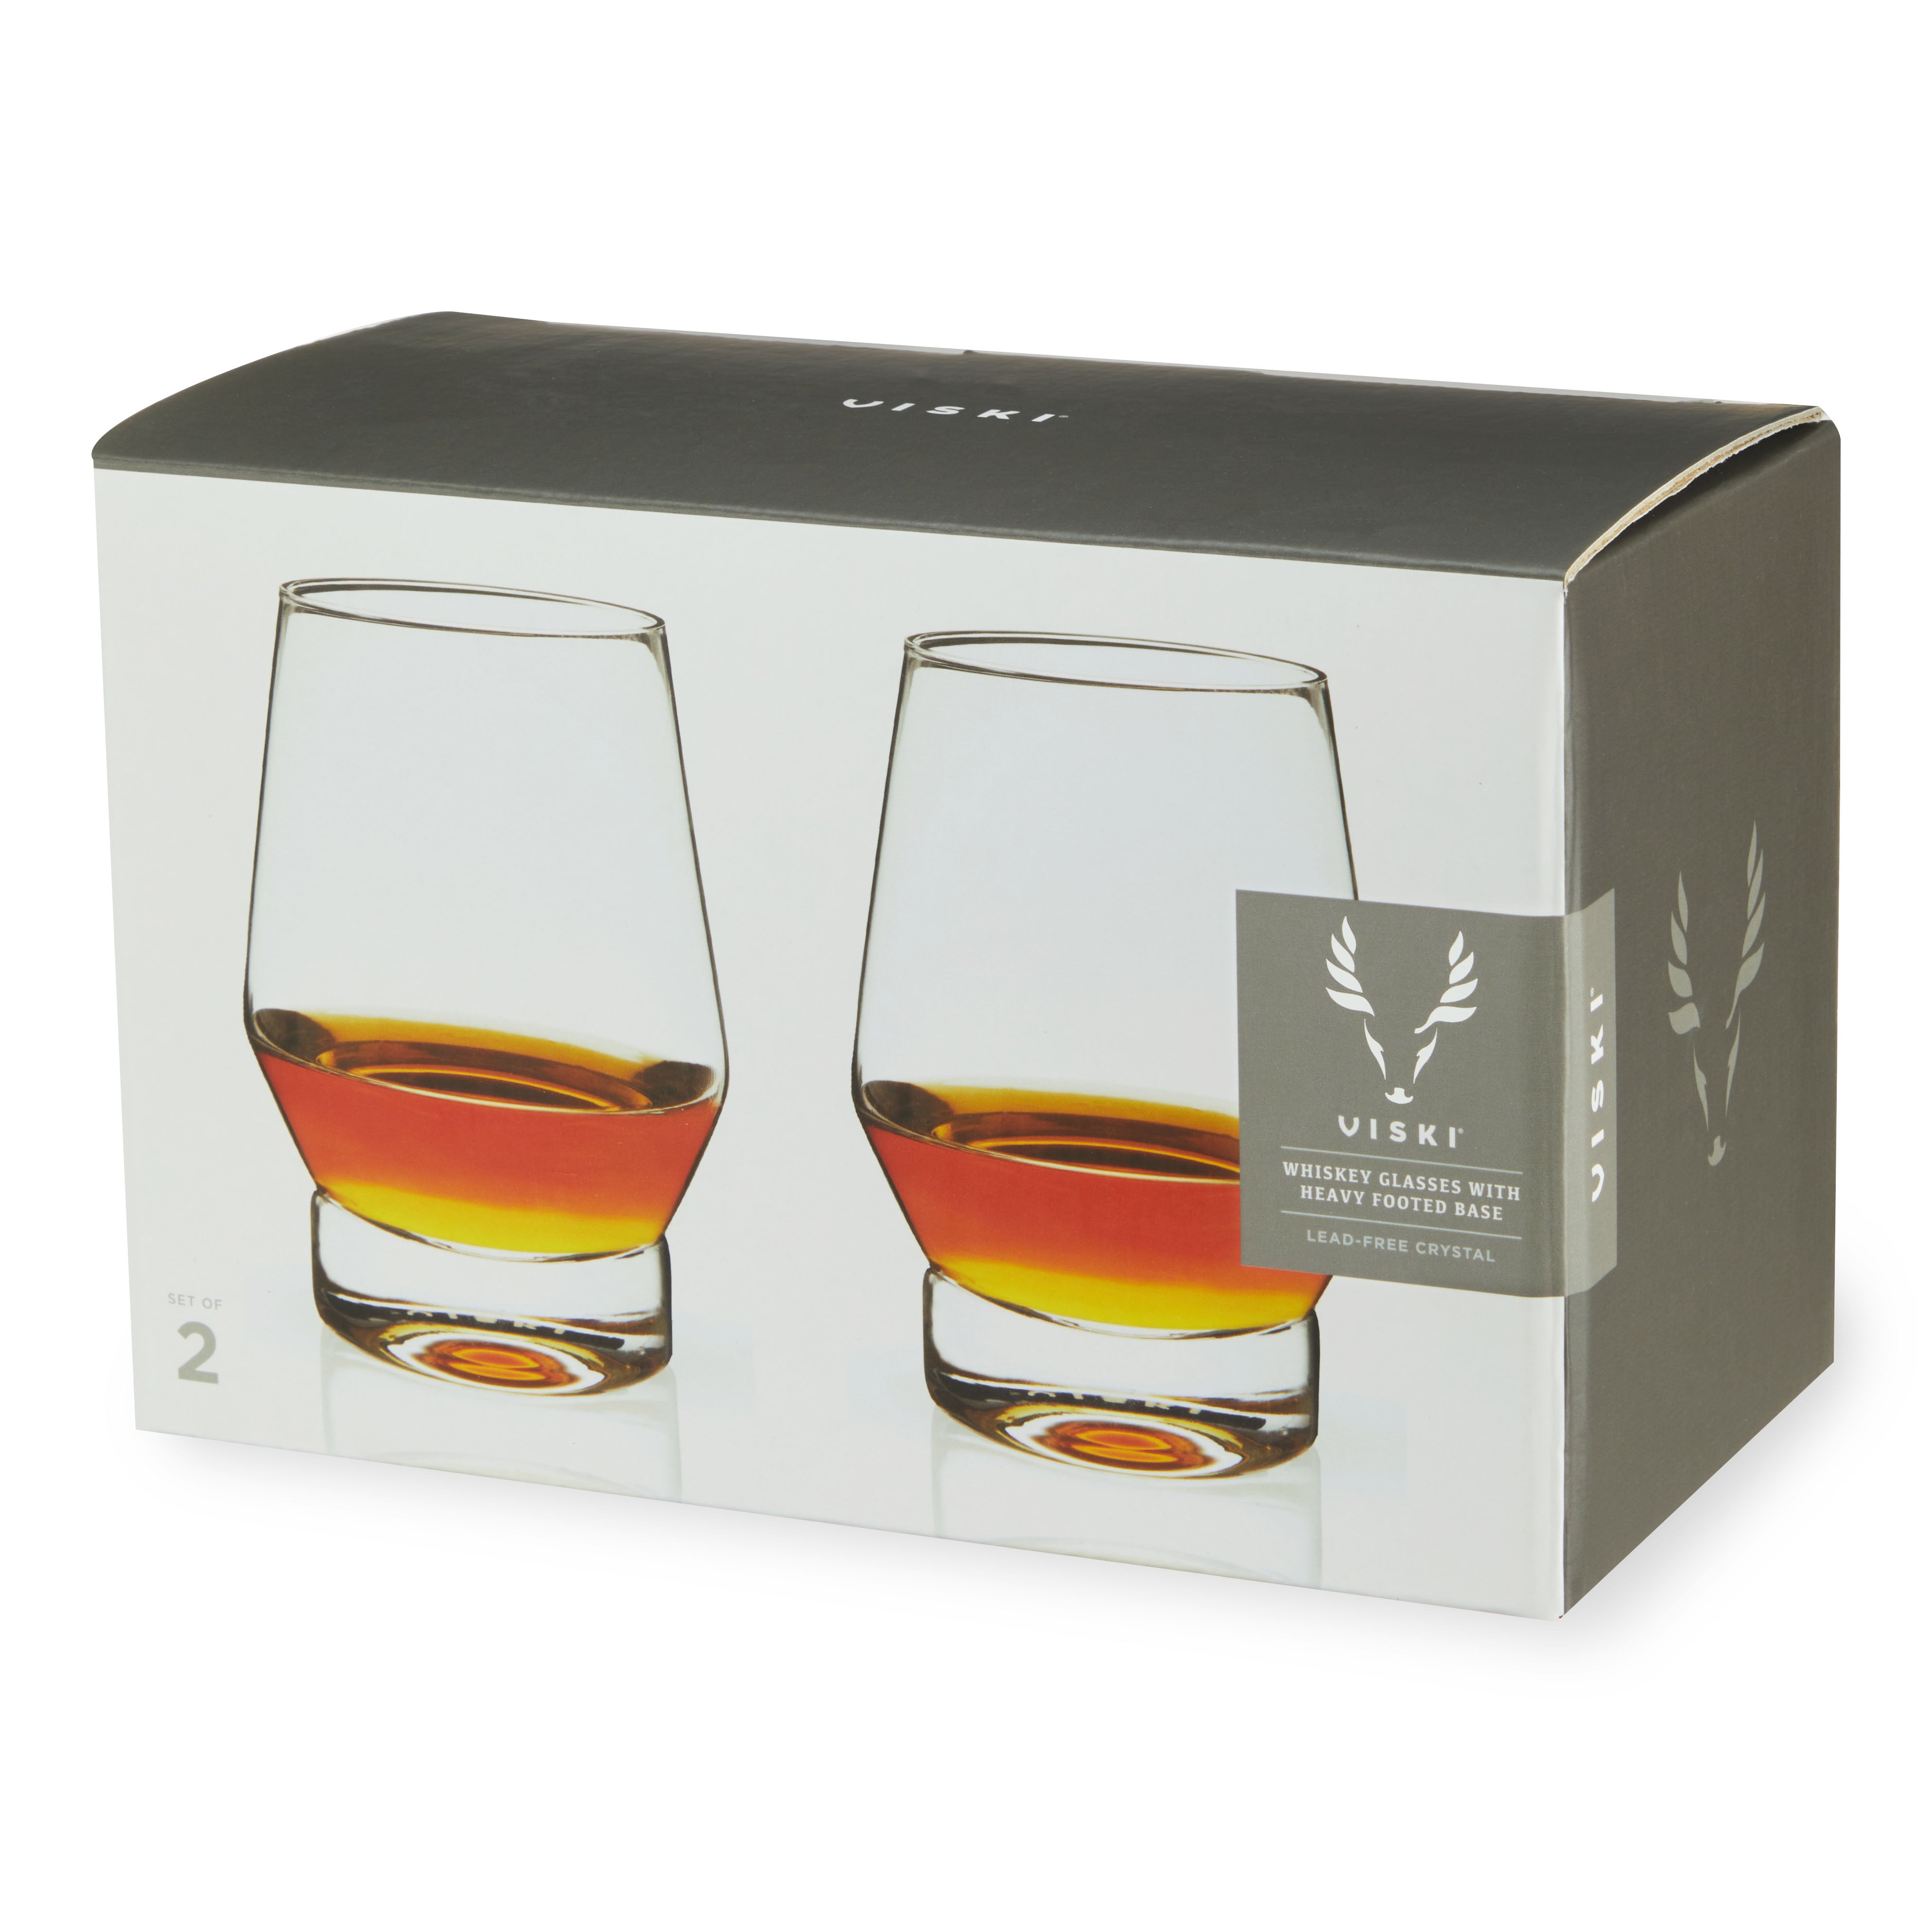 Bezrat Lead-Free Crystal Double Old-Fashioned Whiskey Glasses, SET OF